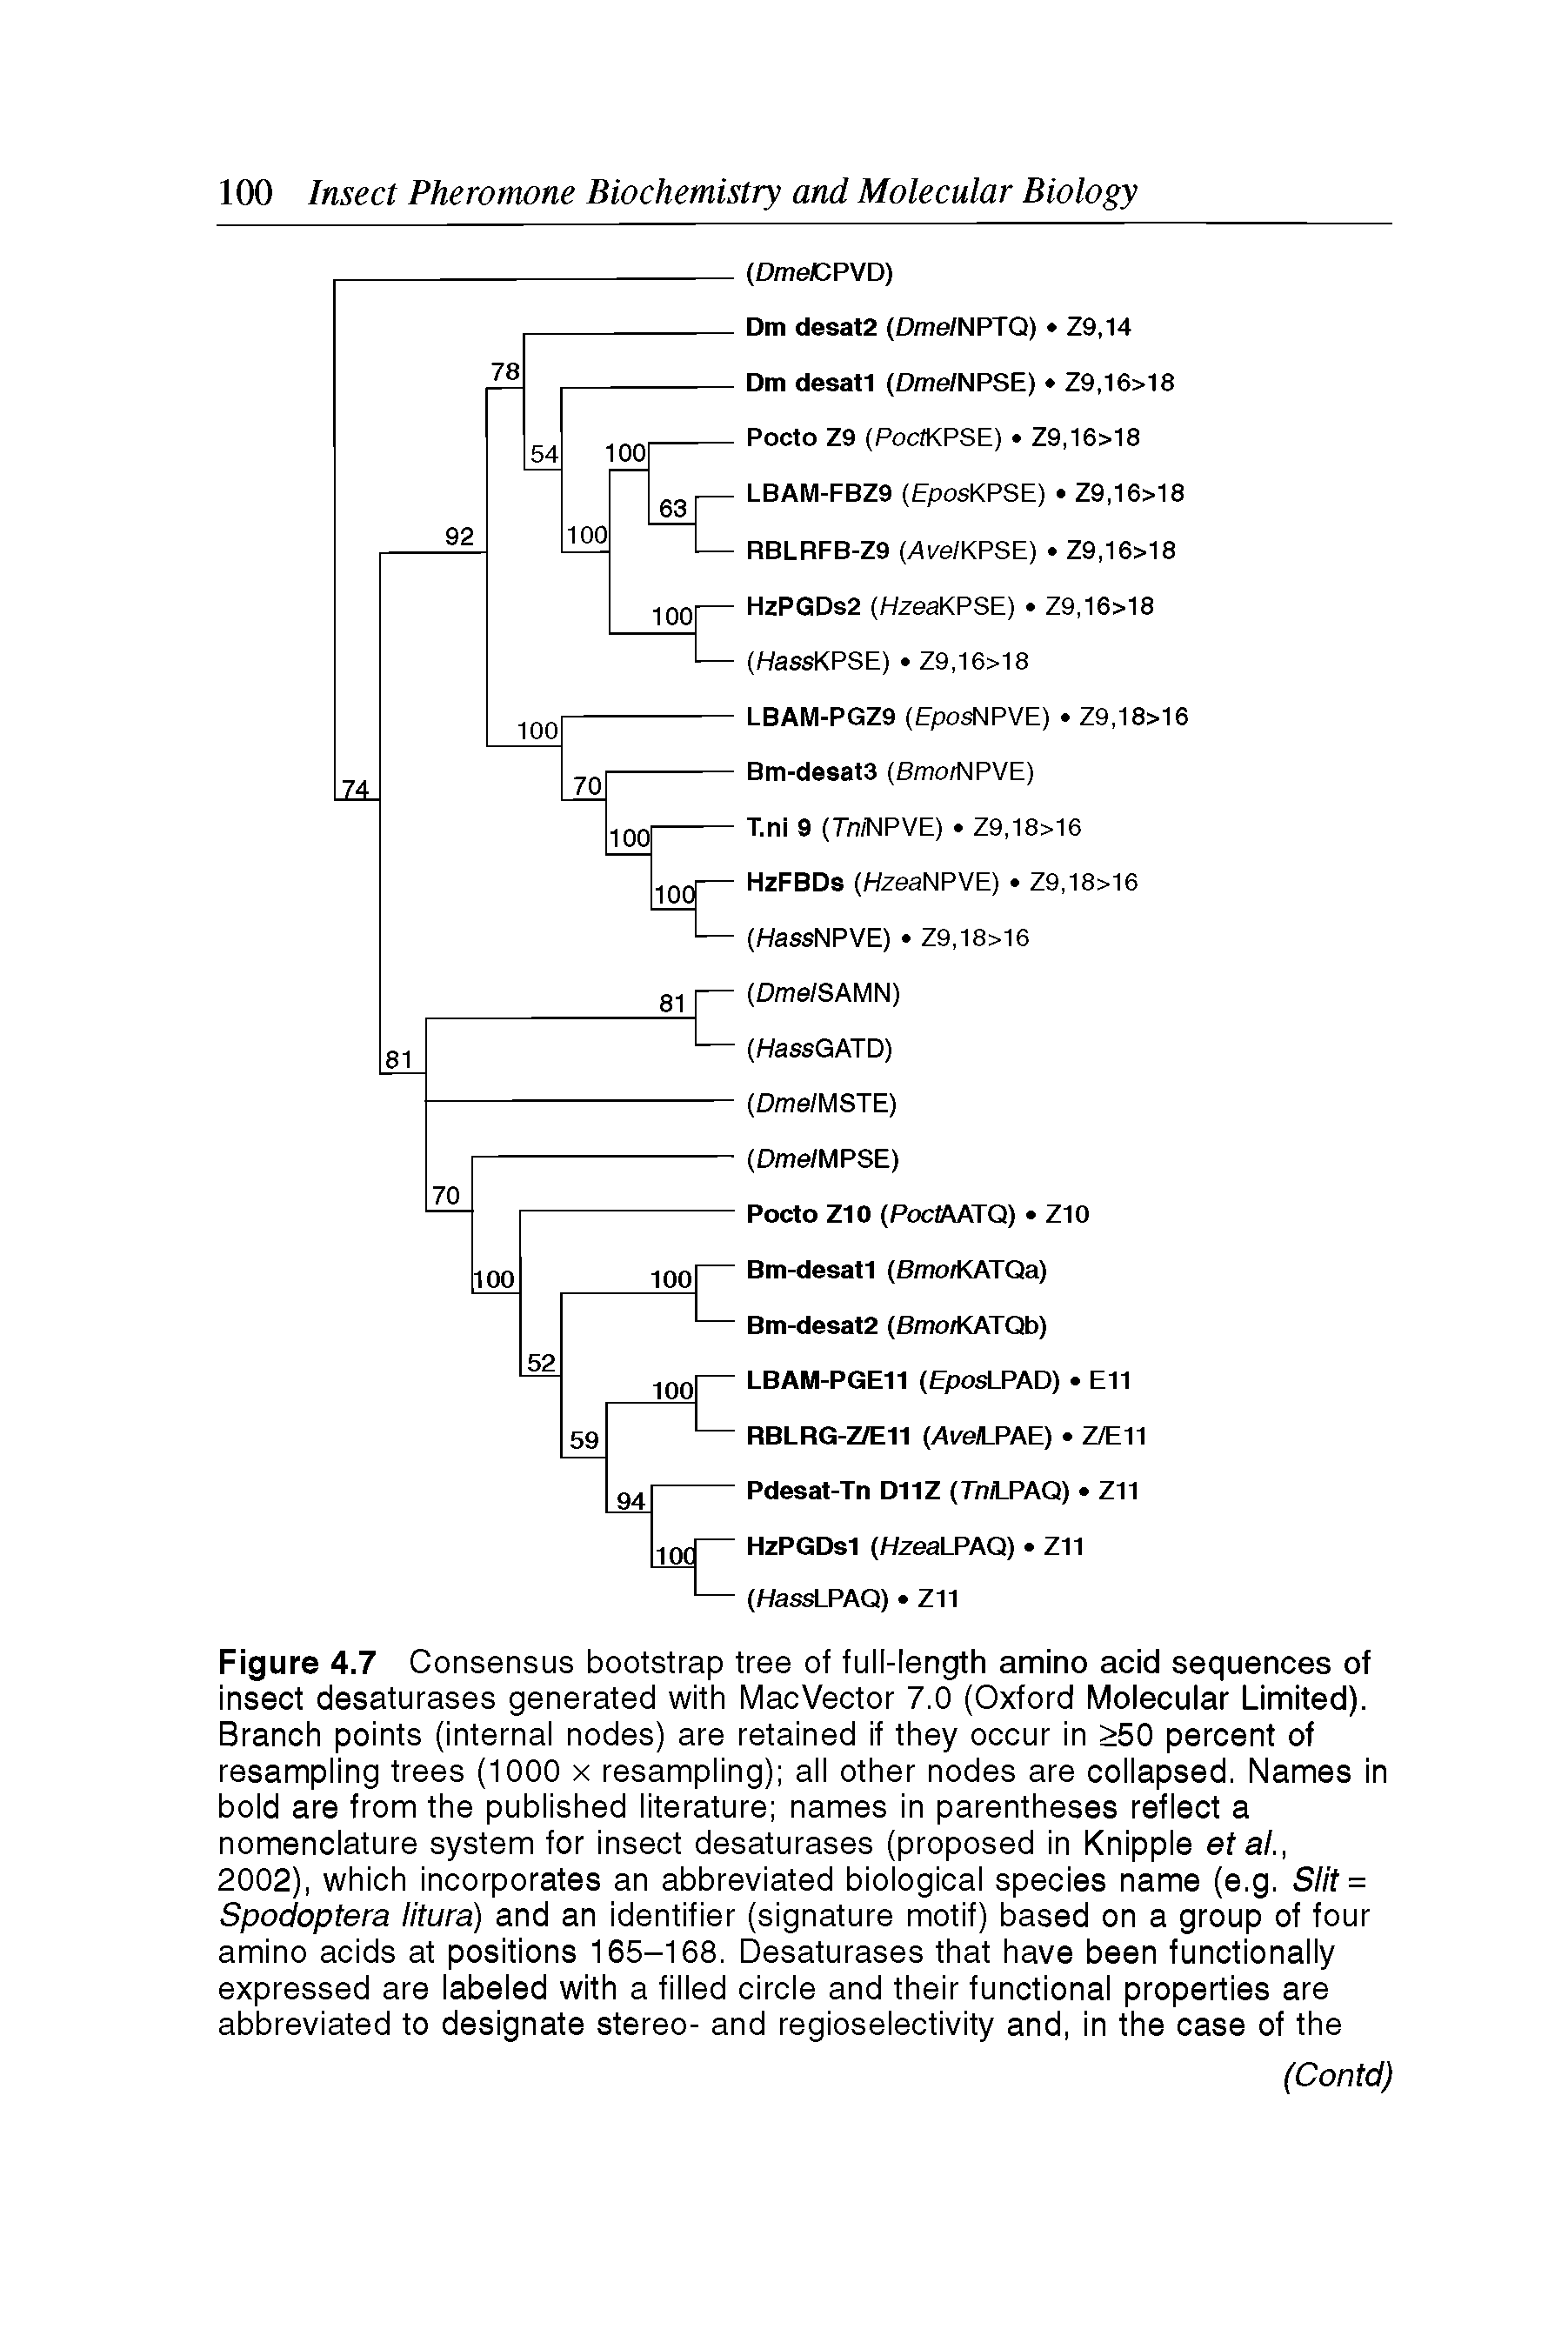 Figure 4.7 Consensus bootstrap tree of full-length amino acid sequences of insect desaturases generated with MacVector 7.0 (Oxford Molecular Limited). Branch points (internal nodes) are retained if they occur in >50 percent of resampling trees (1000 x resampling) all other nodes are collapsed. Names in bold are from the published literature names in parentheses reflect a nomenclature system for insect desaturases (proposed in Knipple ef a/.,...